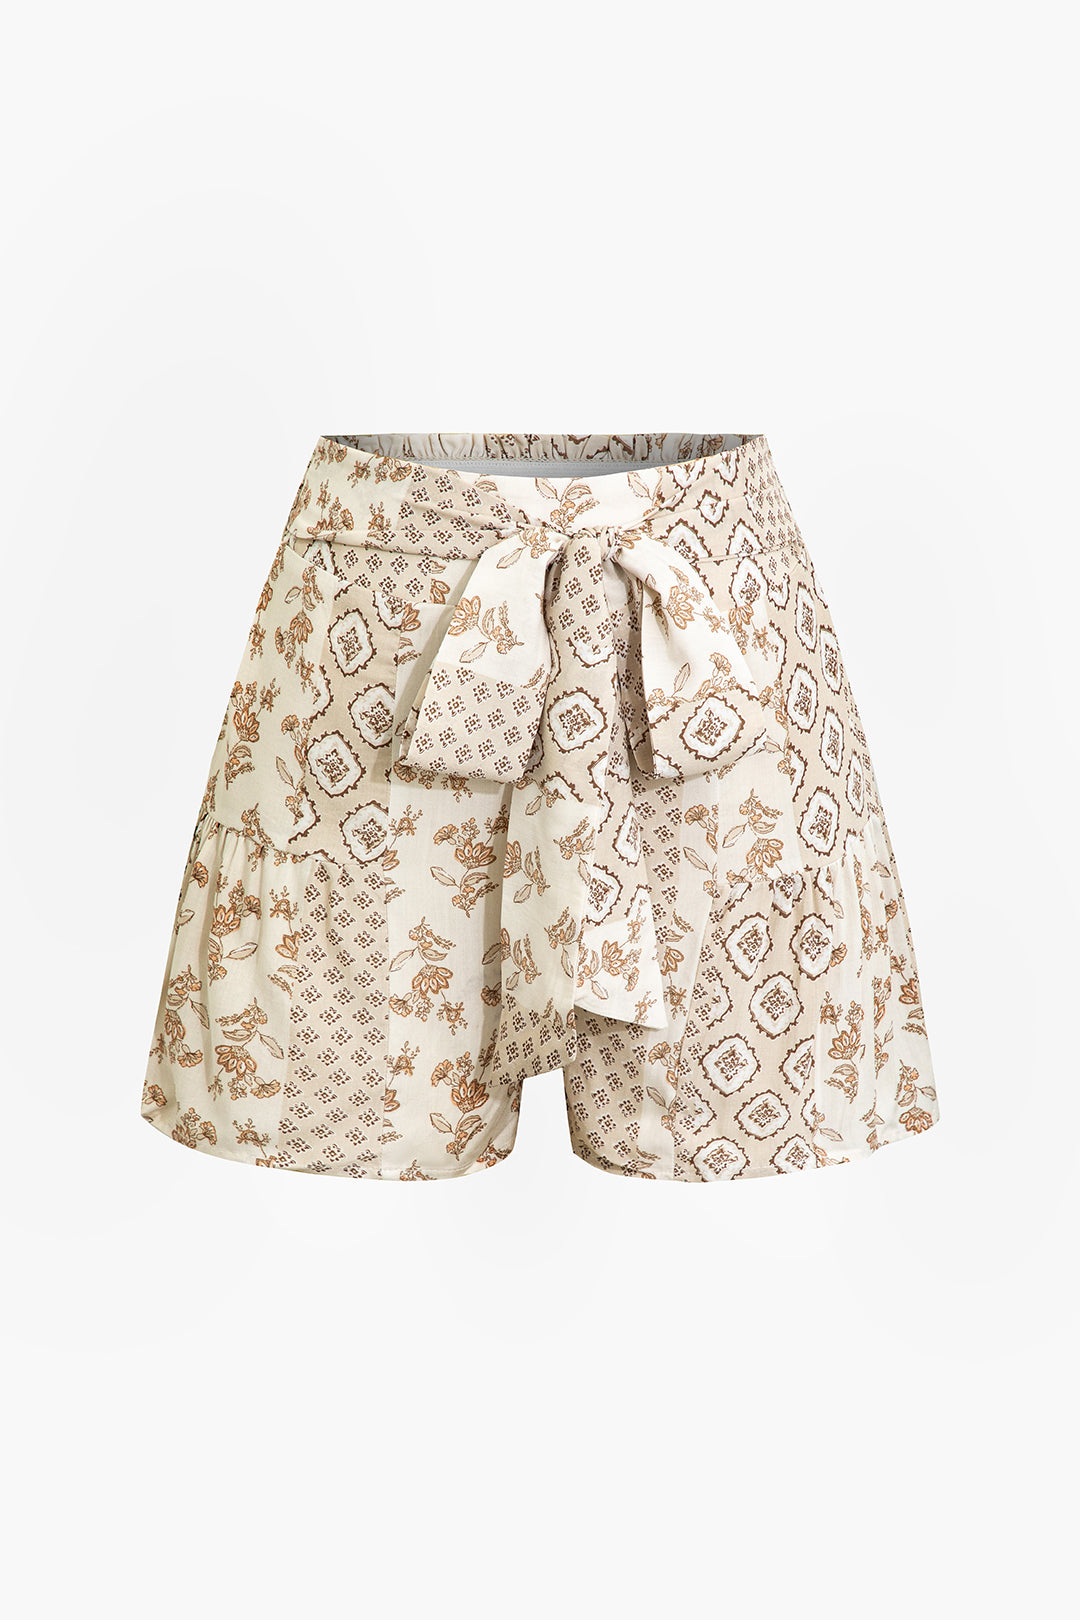 Floral Print Bow-Tie Shorts